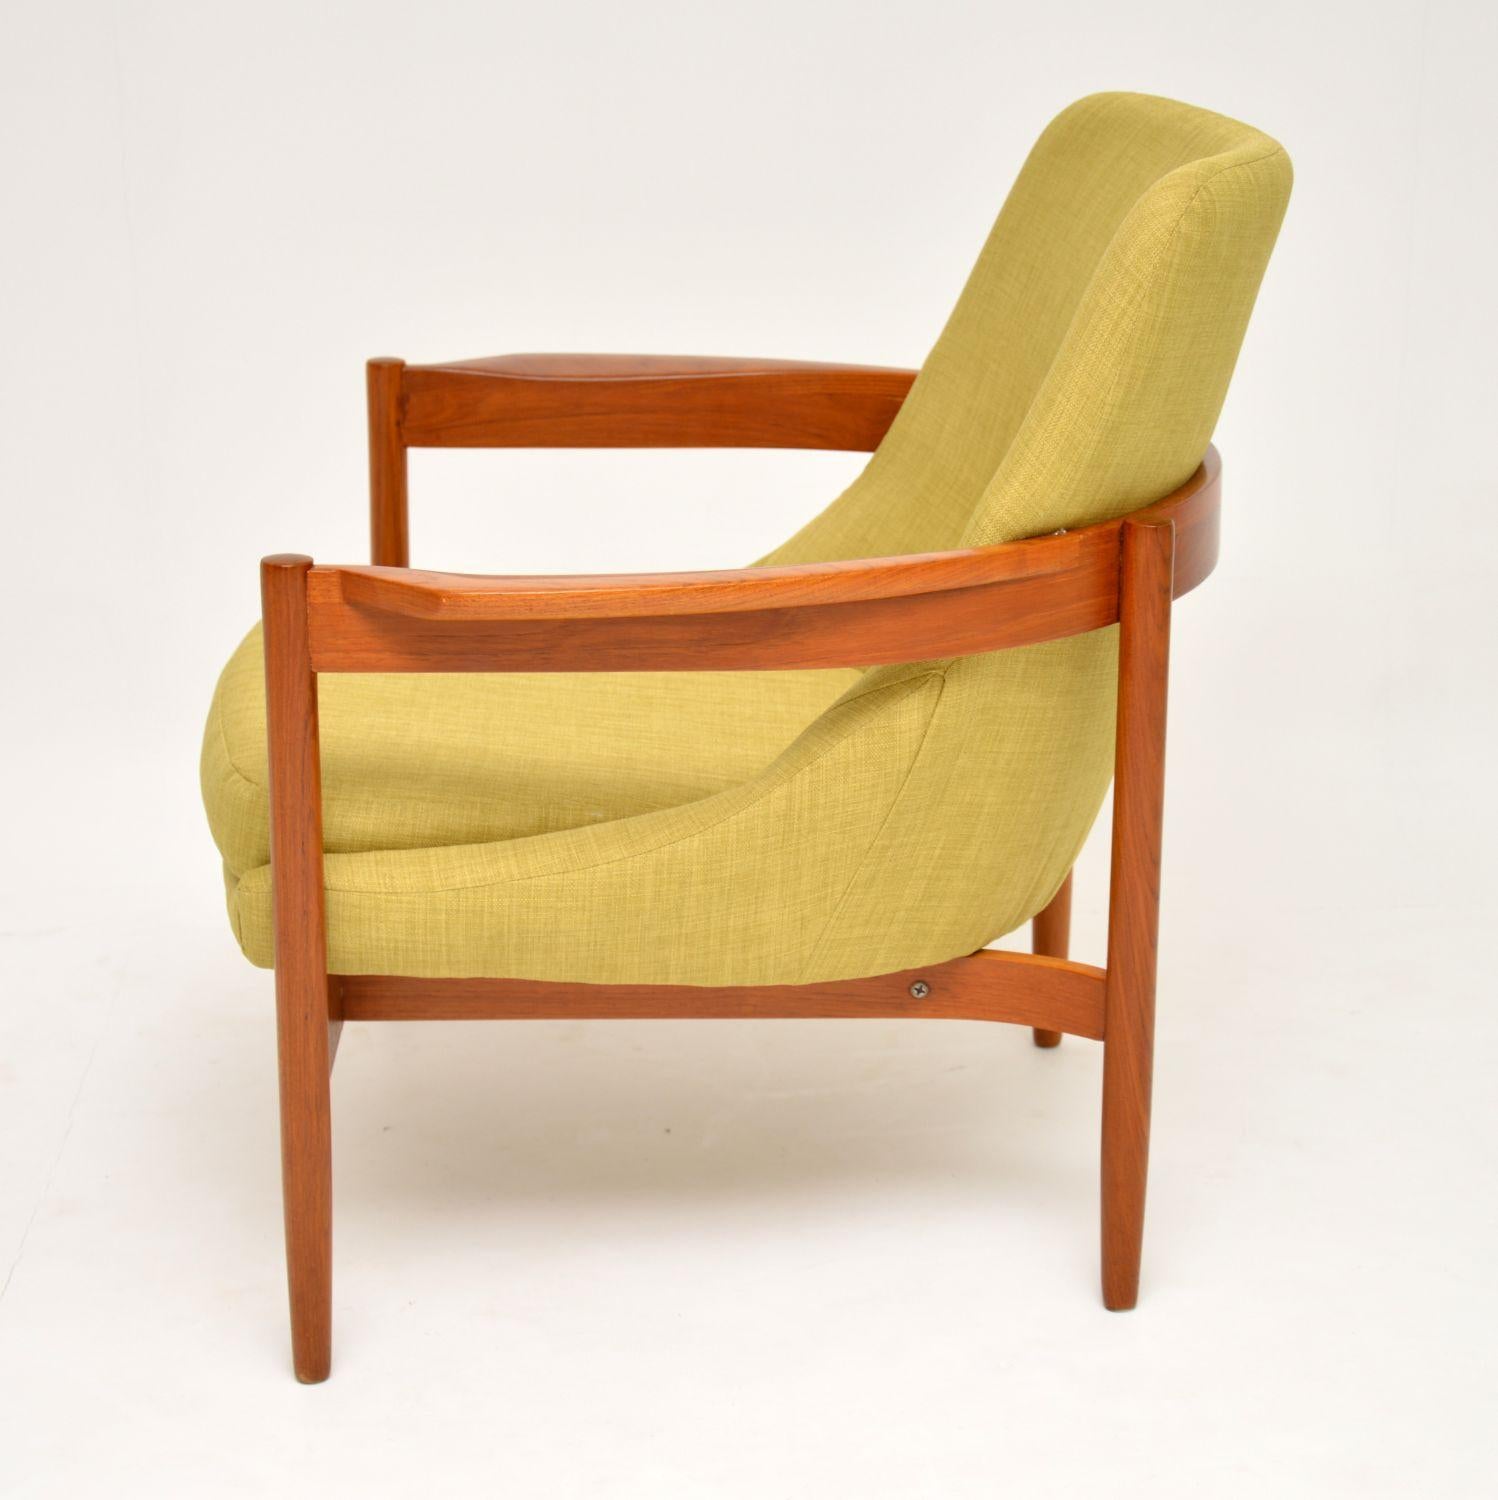 English 1960s Vintage Teak ‘Delta’ Armchair by Guy Rogers